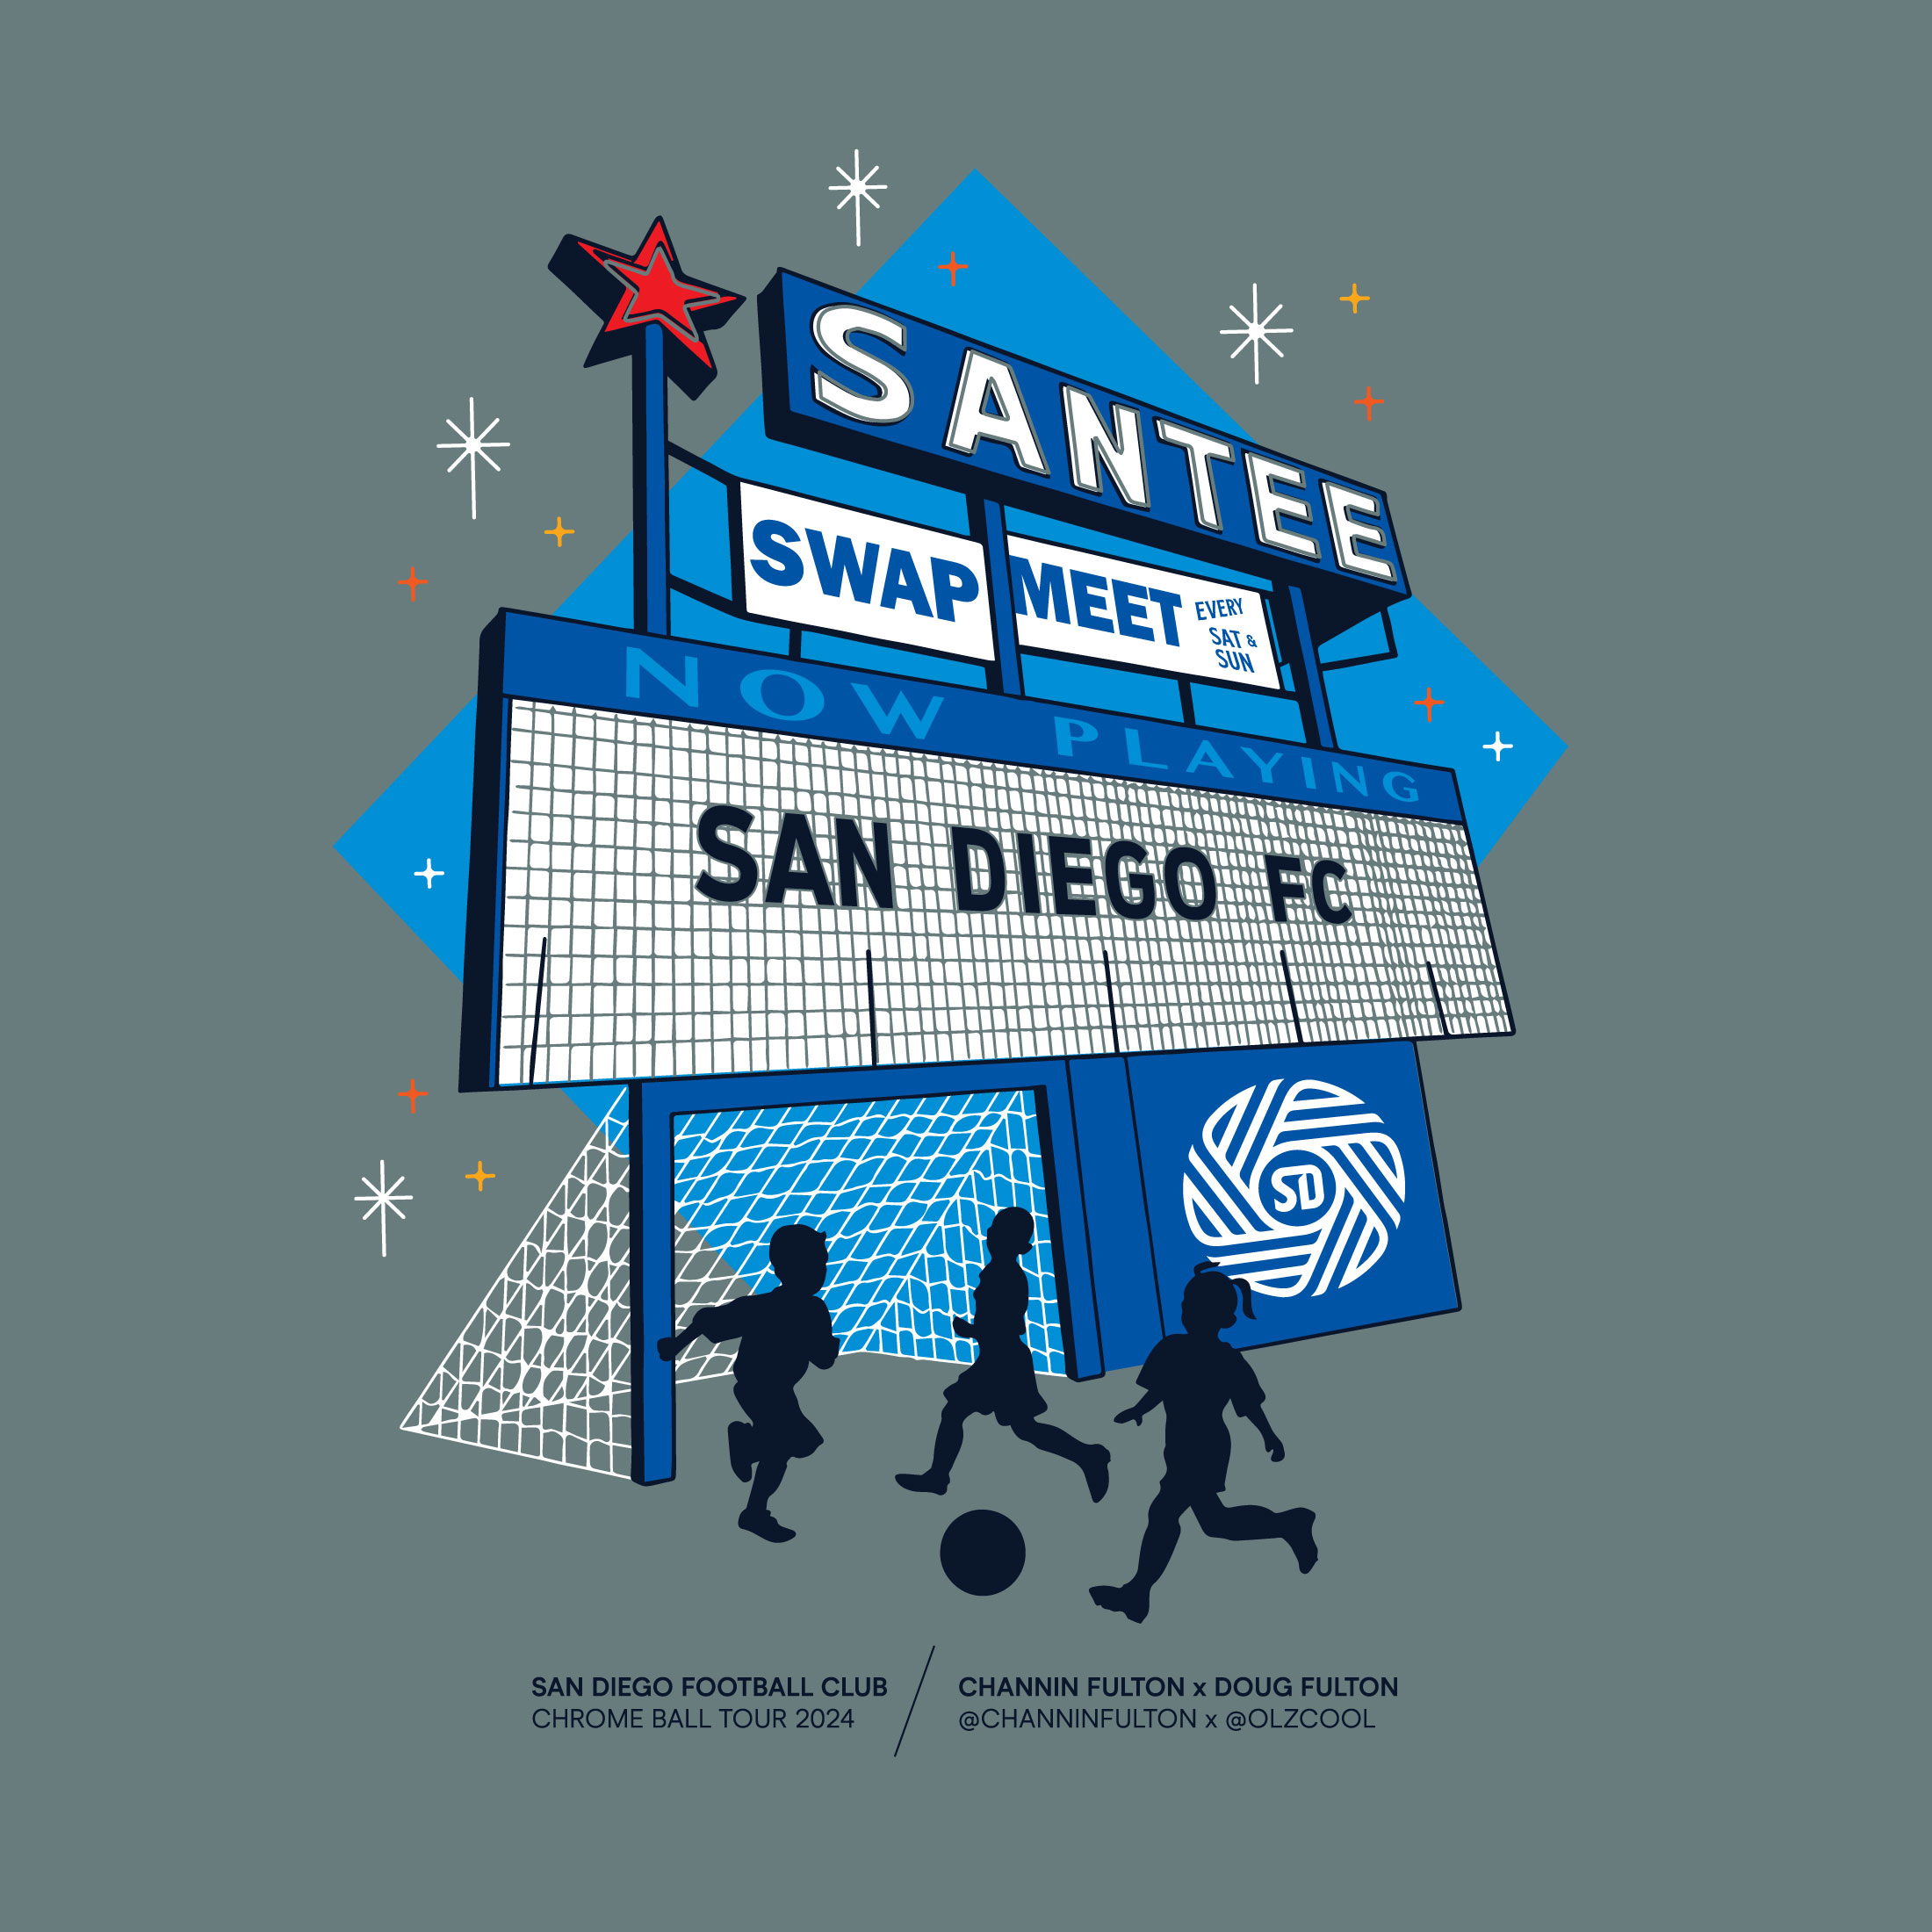 Artwork by Channin Fulton and Doug Fulton for the Santee Chrome Ball Tour Stop, featuring a large sign that says "Santee Swap Meet; Now Playing: San Diego FC" and silhouettes of 3 children playing soccer in front of a soccer goal.